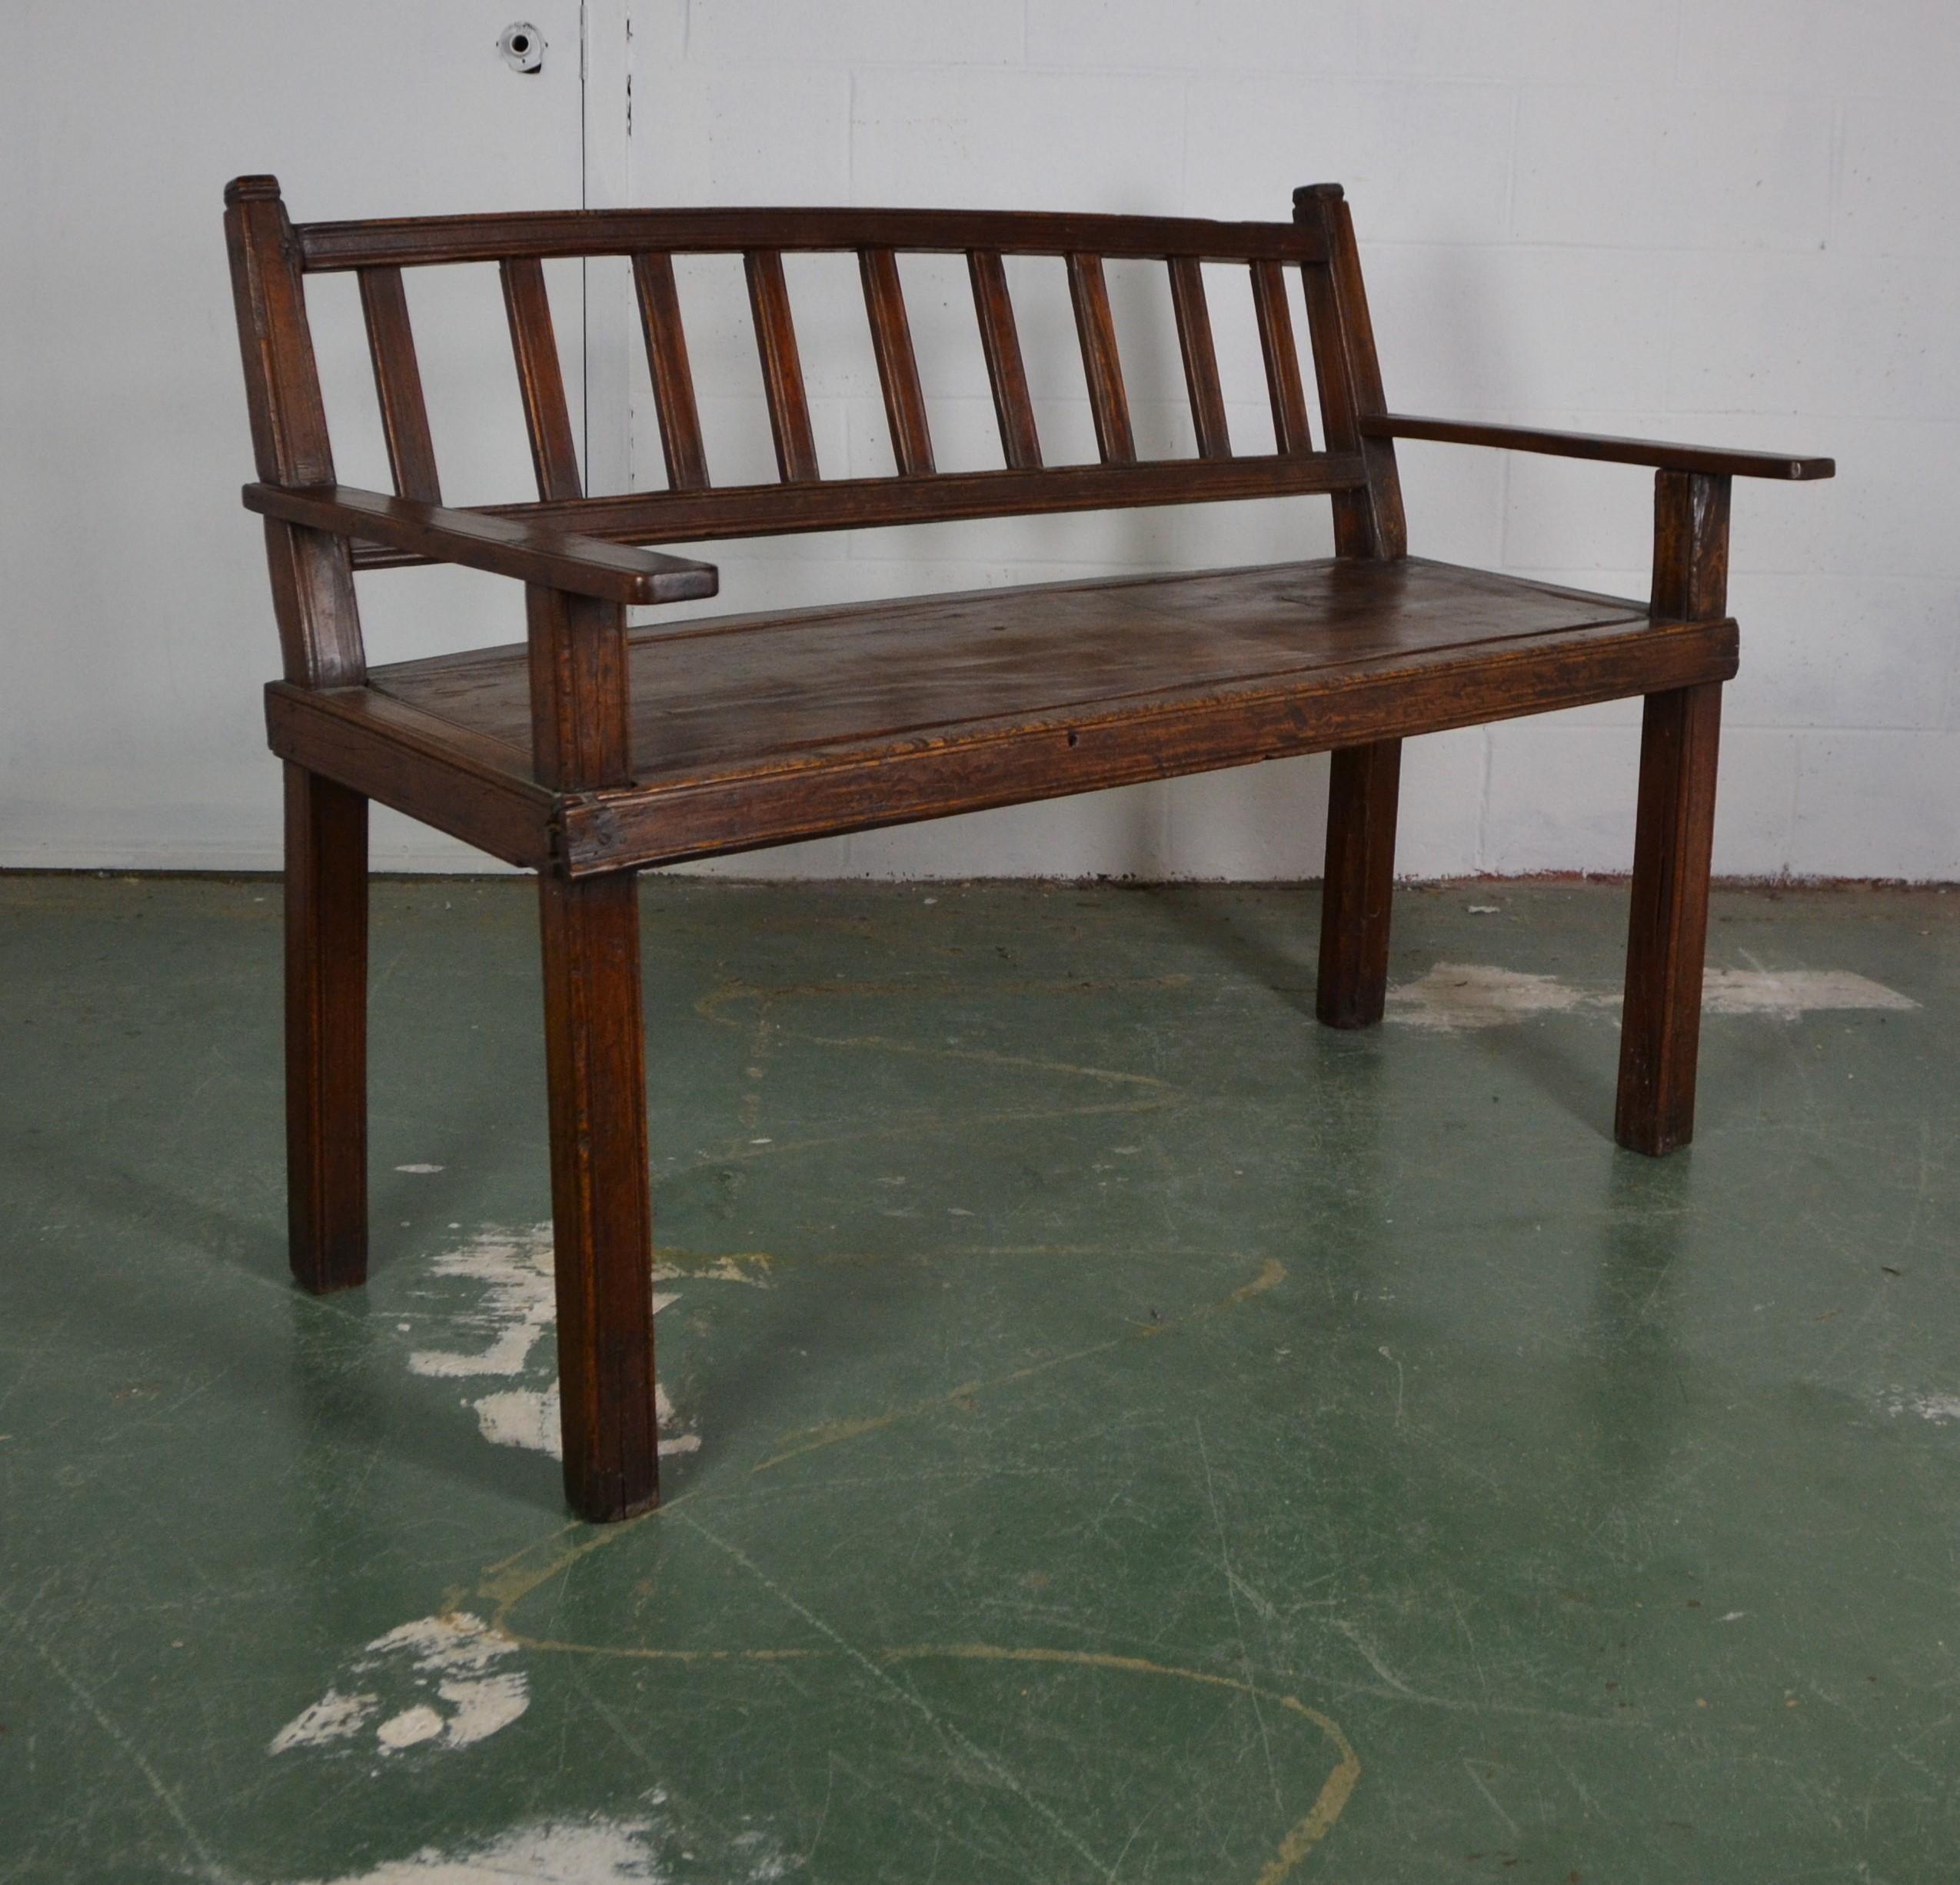 19th century French bench. Simple straight lines.